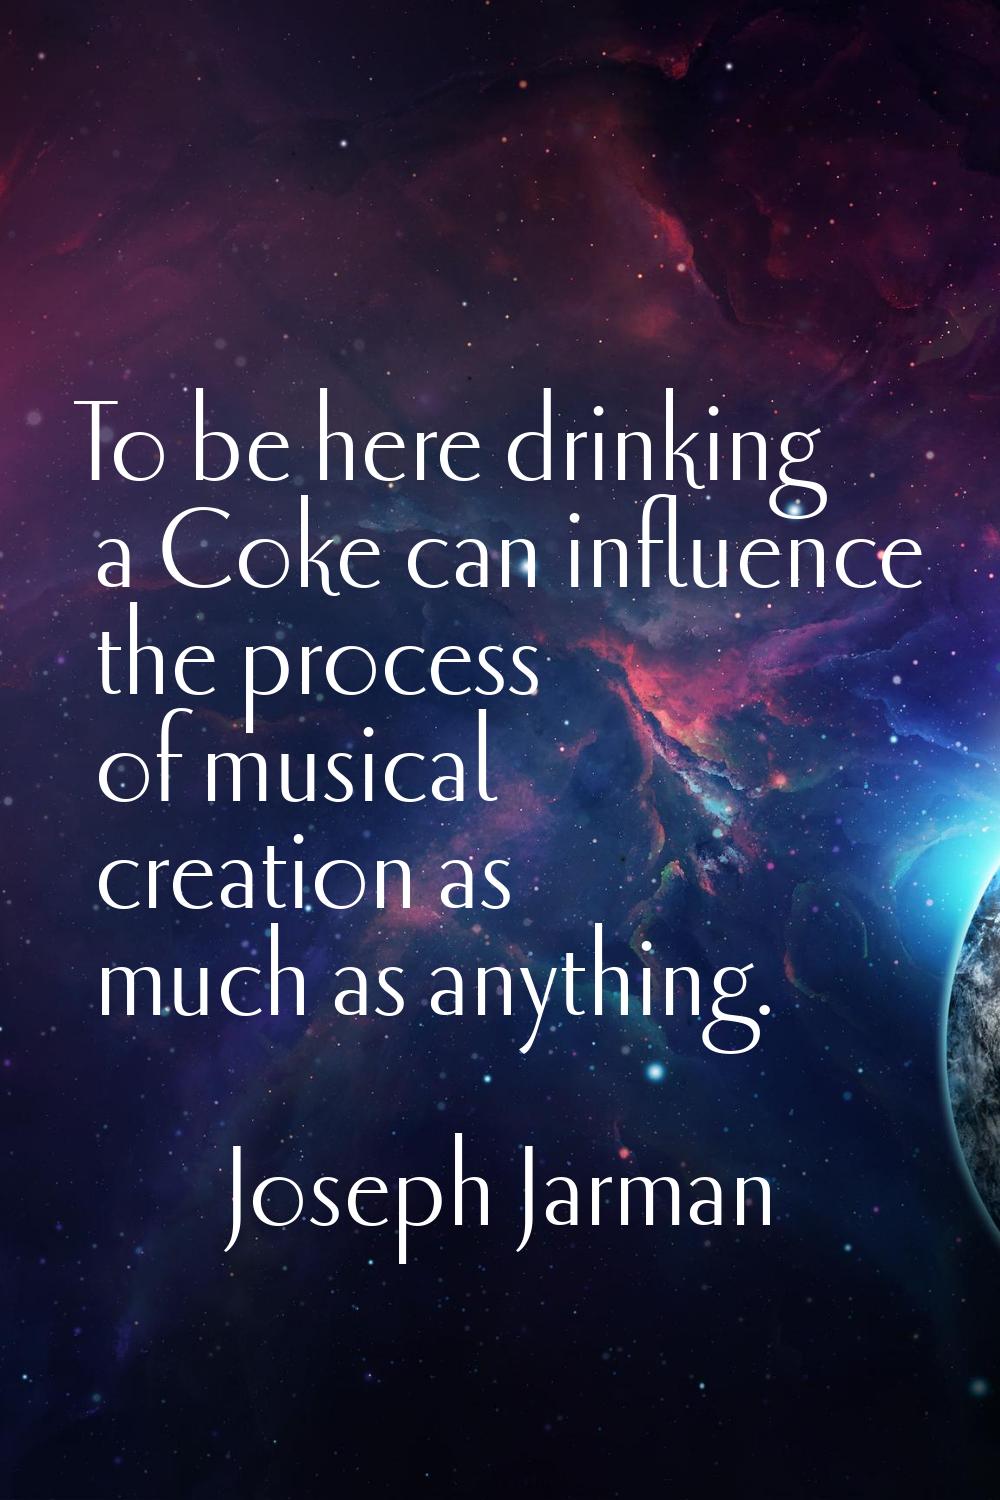 To be here drinking a Coke can influence the process of musical creation as much as anything.